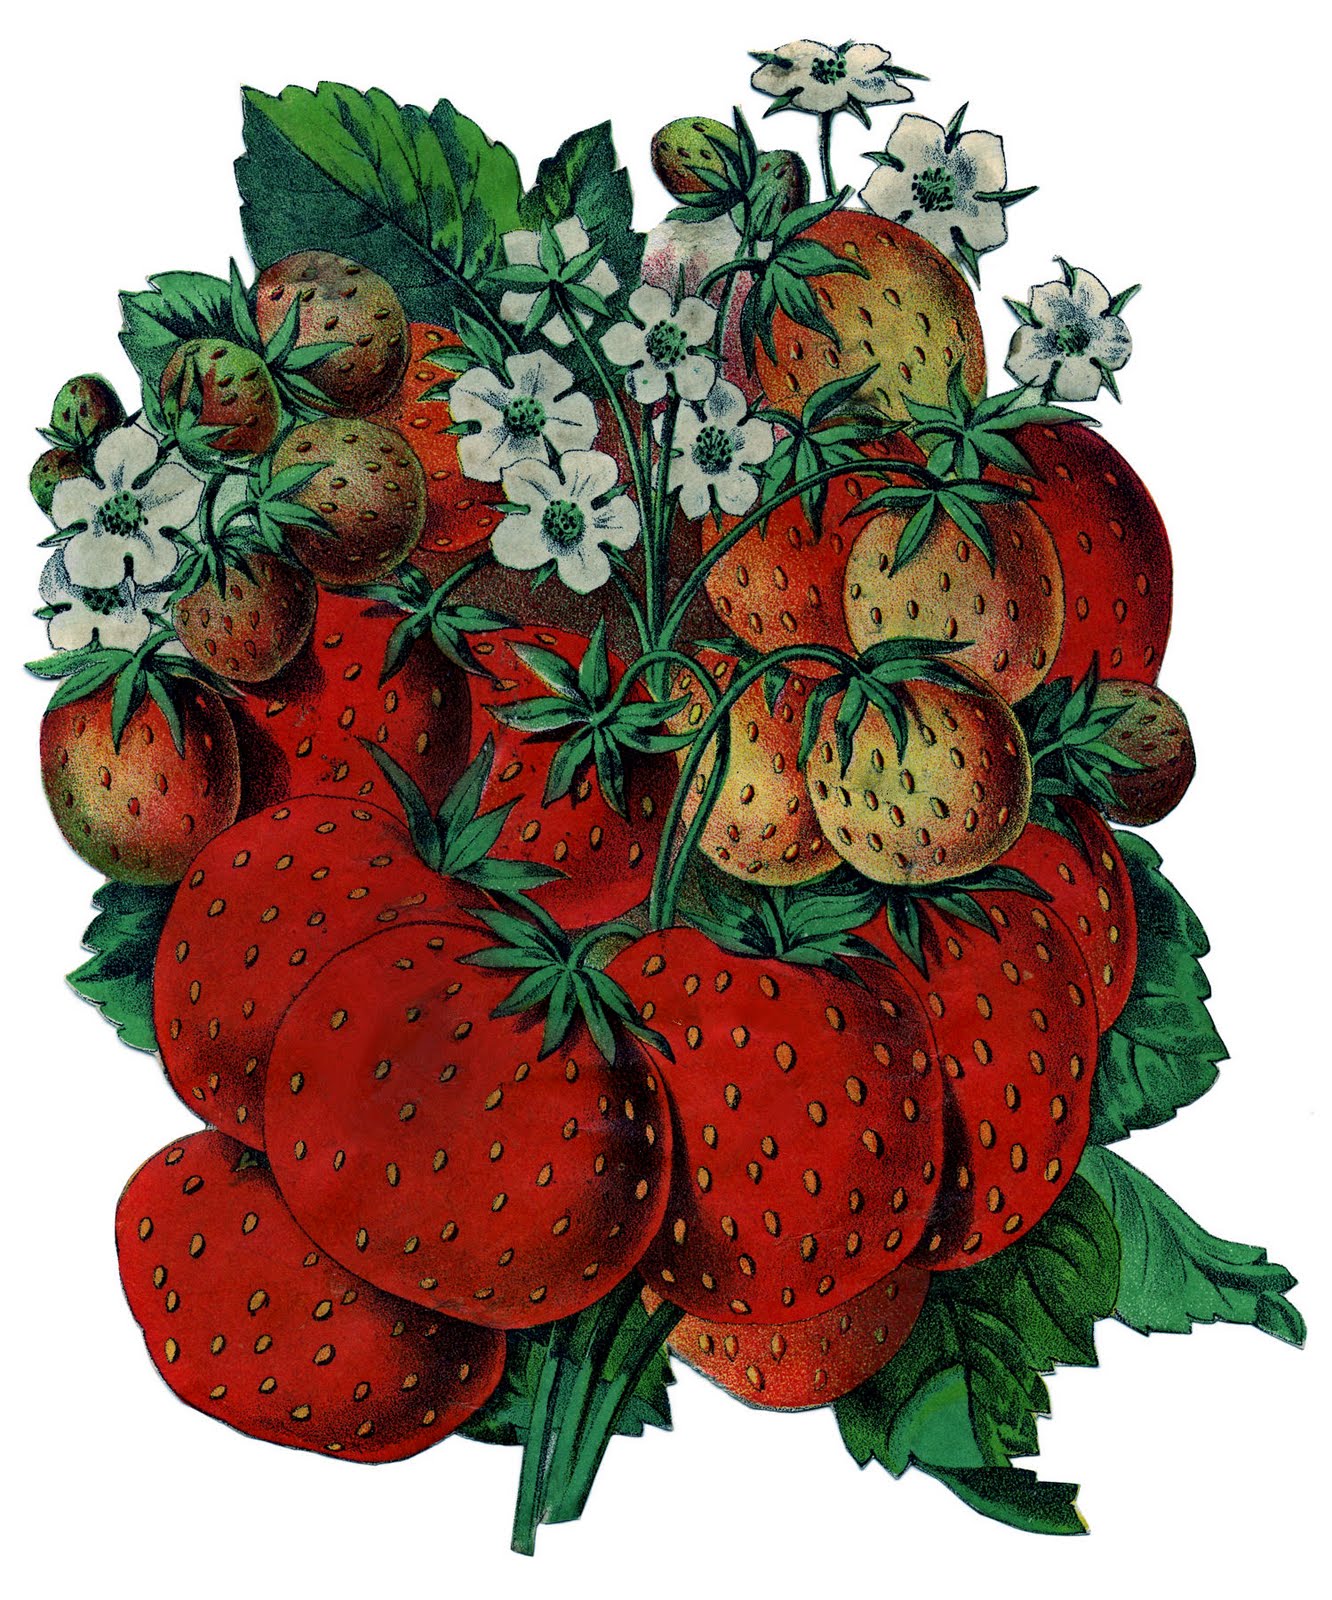 Old Seed Catalog Art - Strawberries - The Graphics Fairy